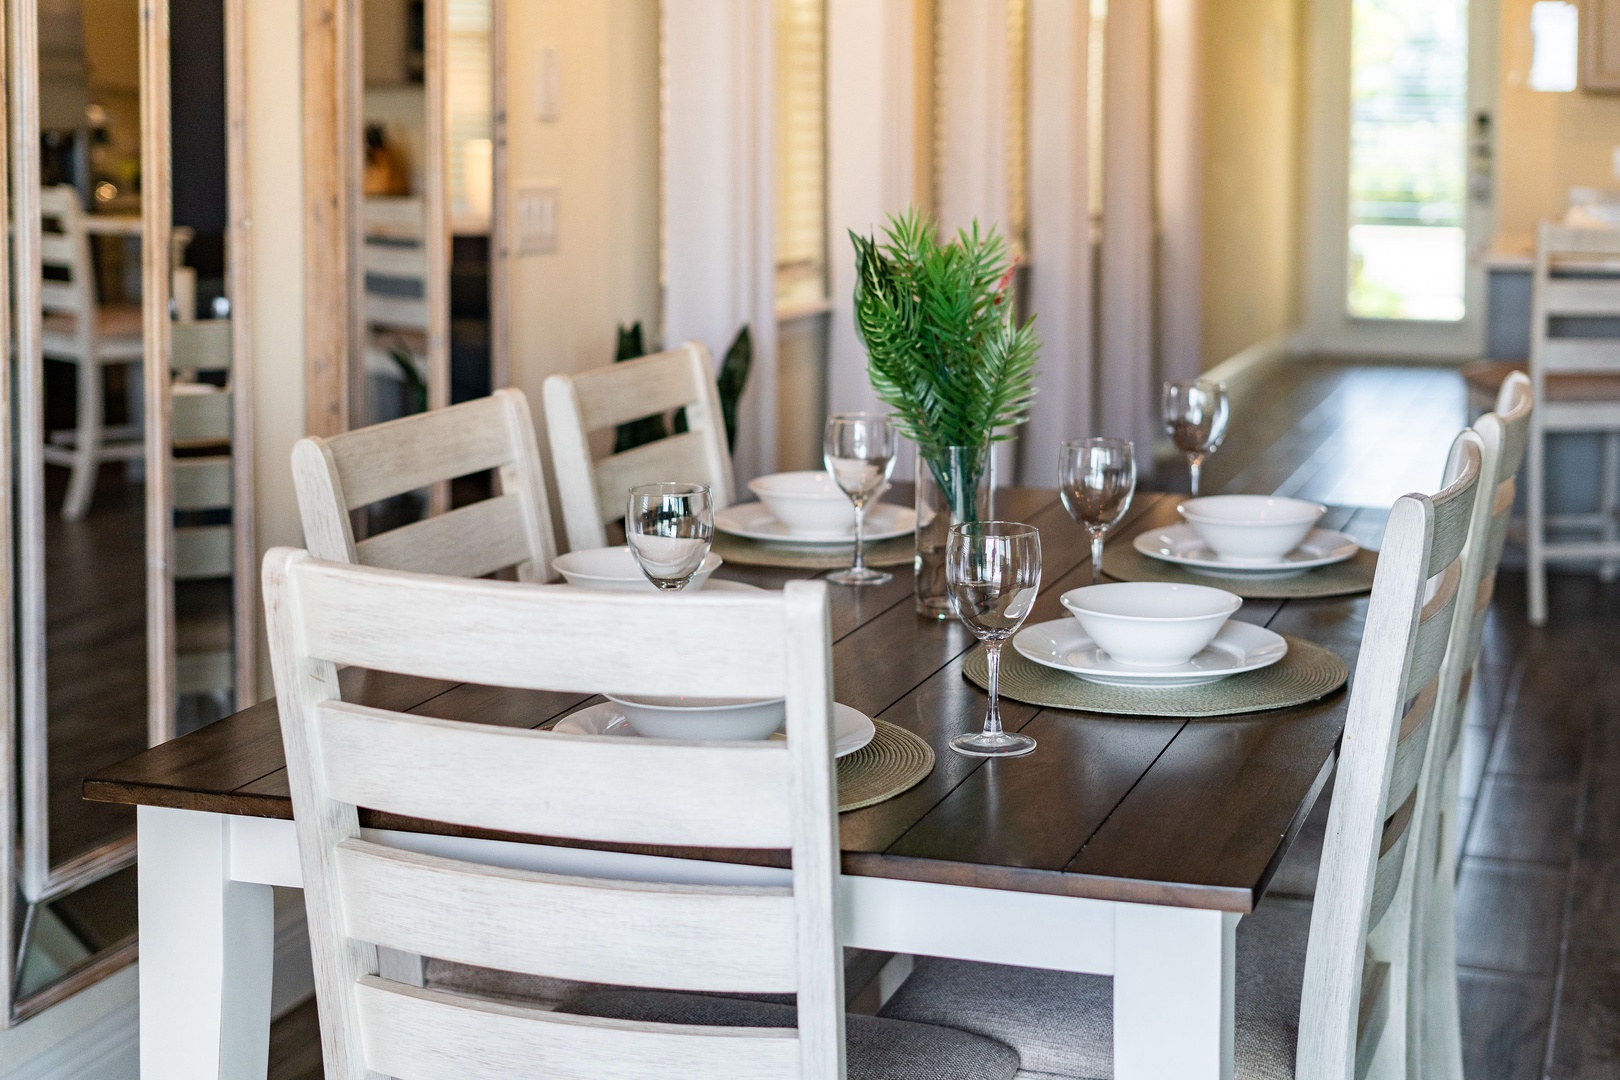 Gather family around the dining table, with seating for 5